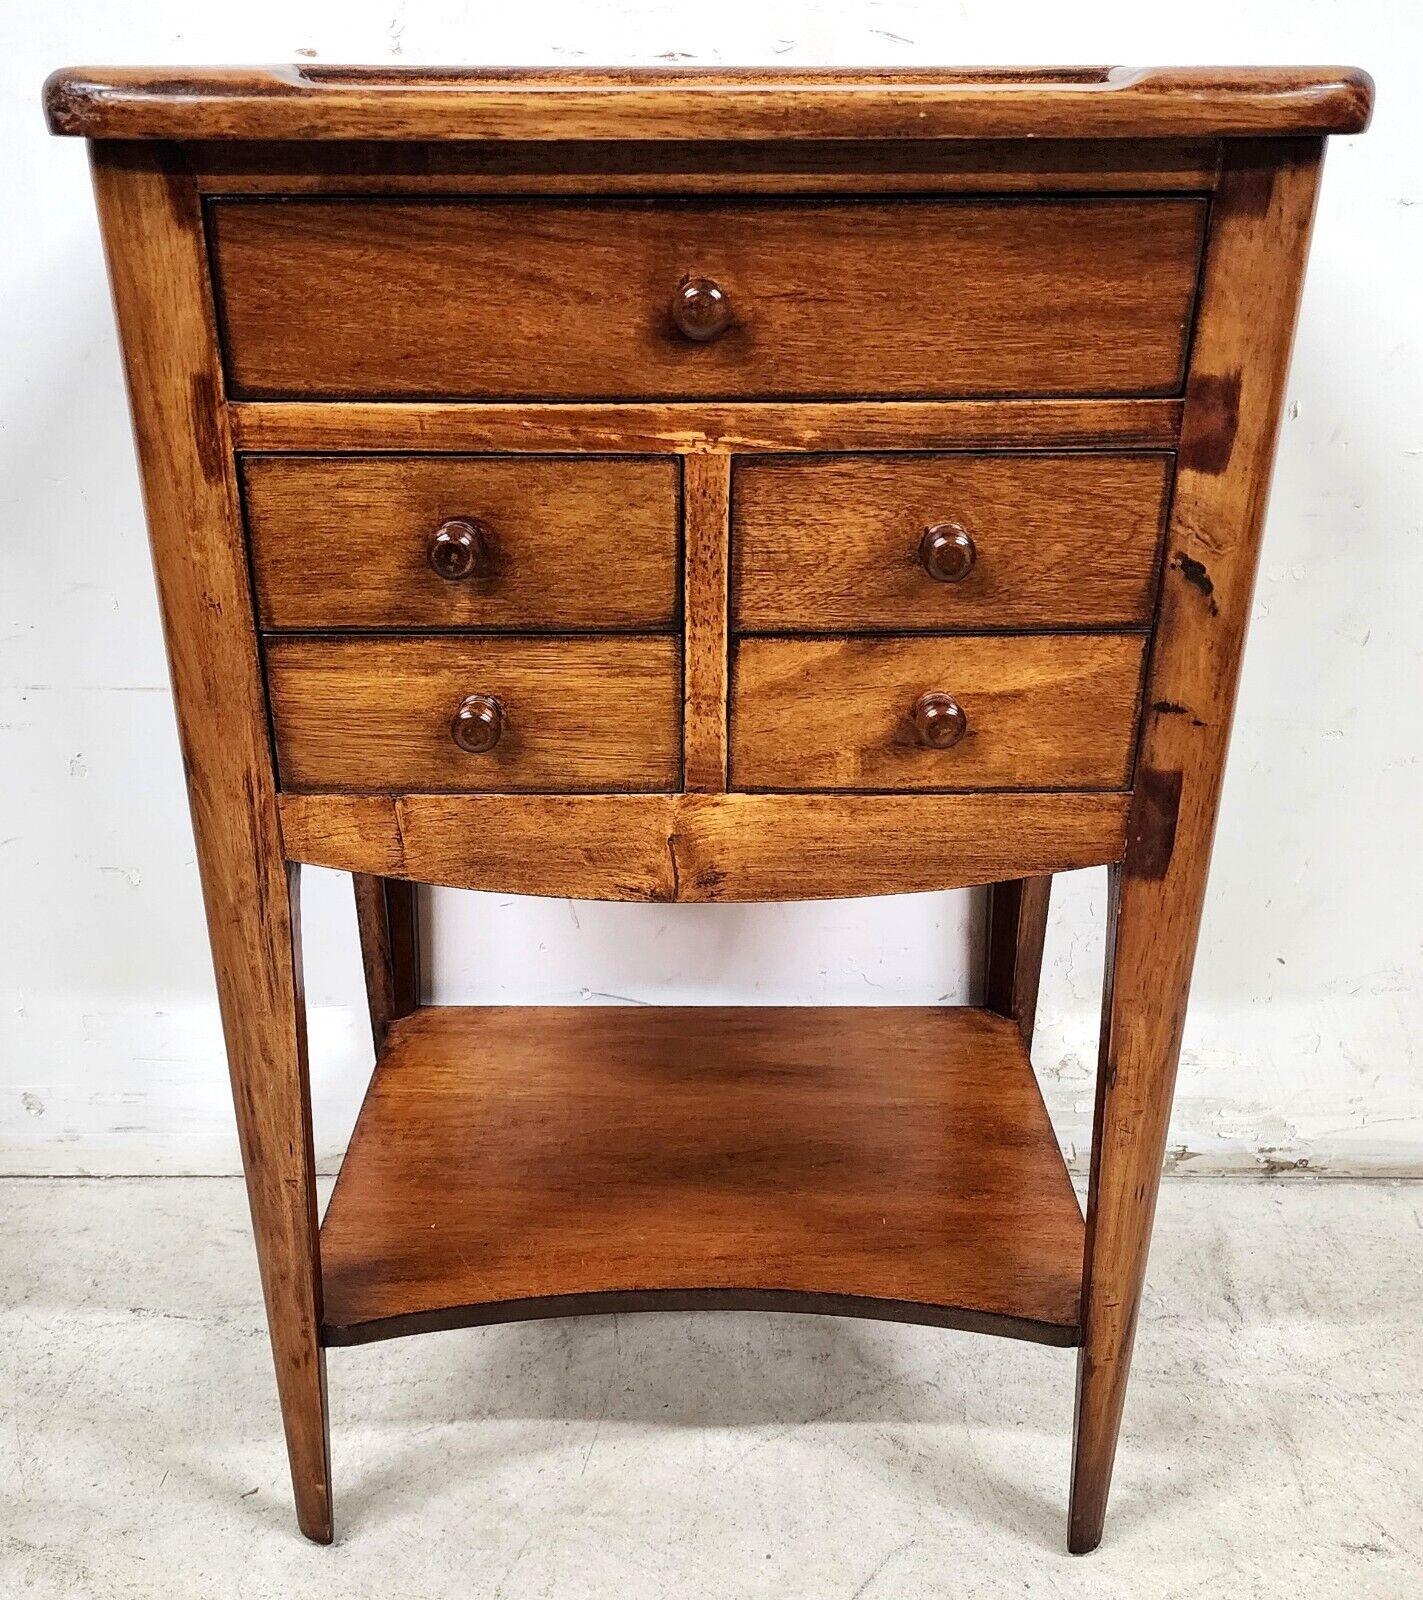 Offering One Of Our Recent Palm Beach Estate Fine Furniture Acquisitions Of A 
French Solid Wood Chiffonnière Table
Featuring 5 drawers and 2 side tool compartments.

Chiffonniere Tables were French worktables of the 18th century with several